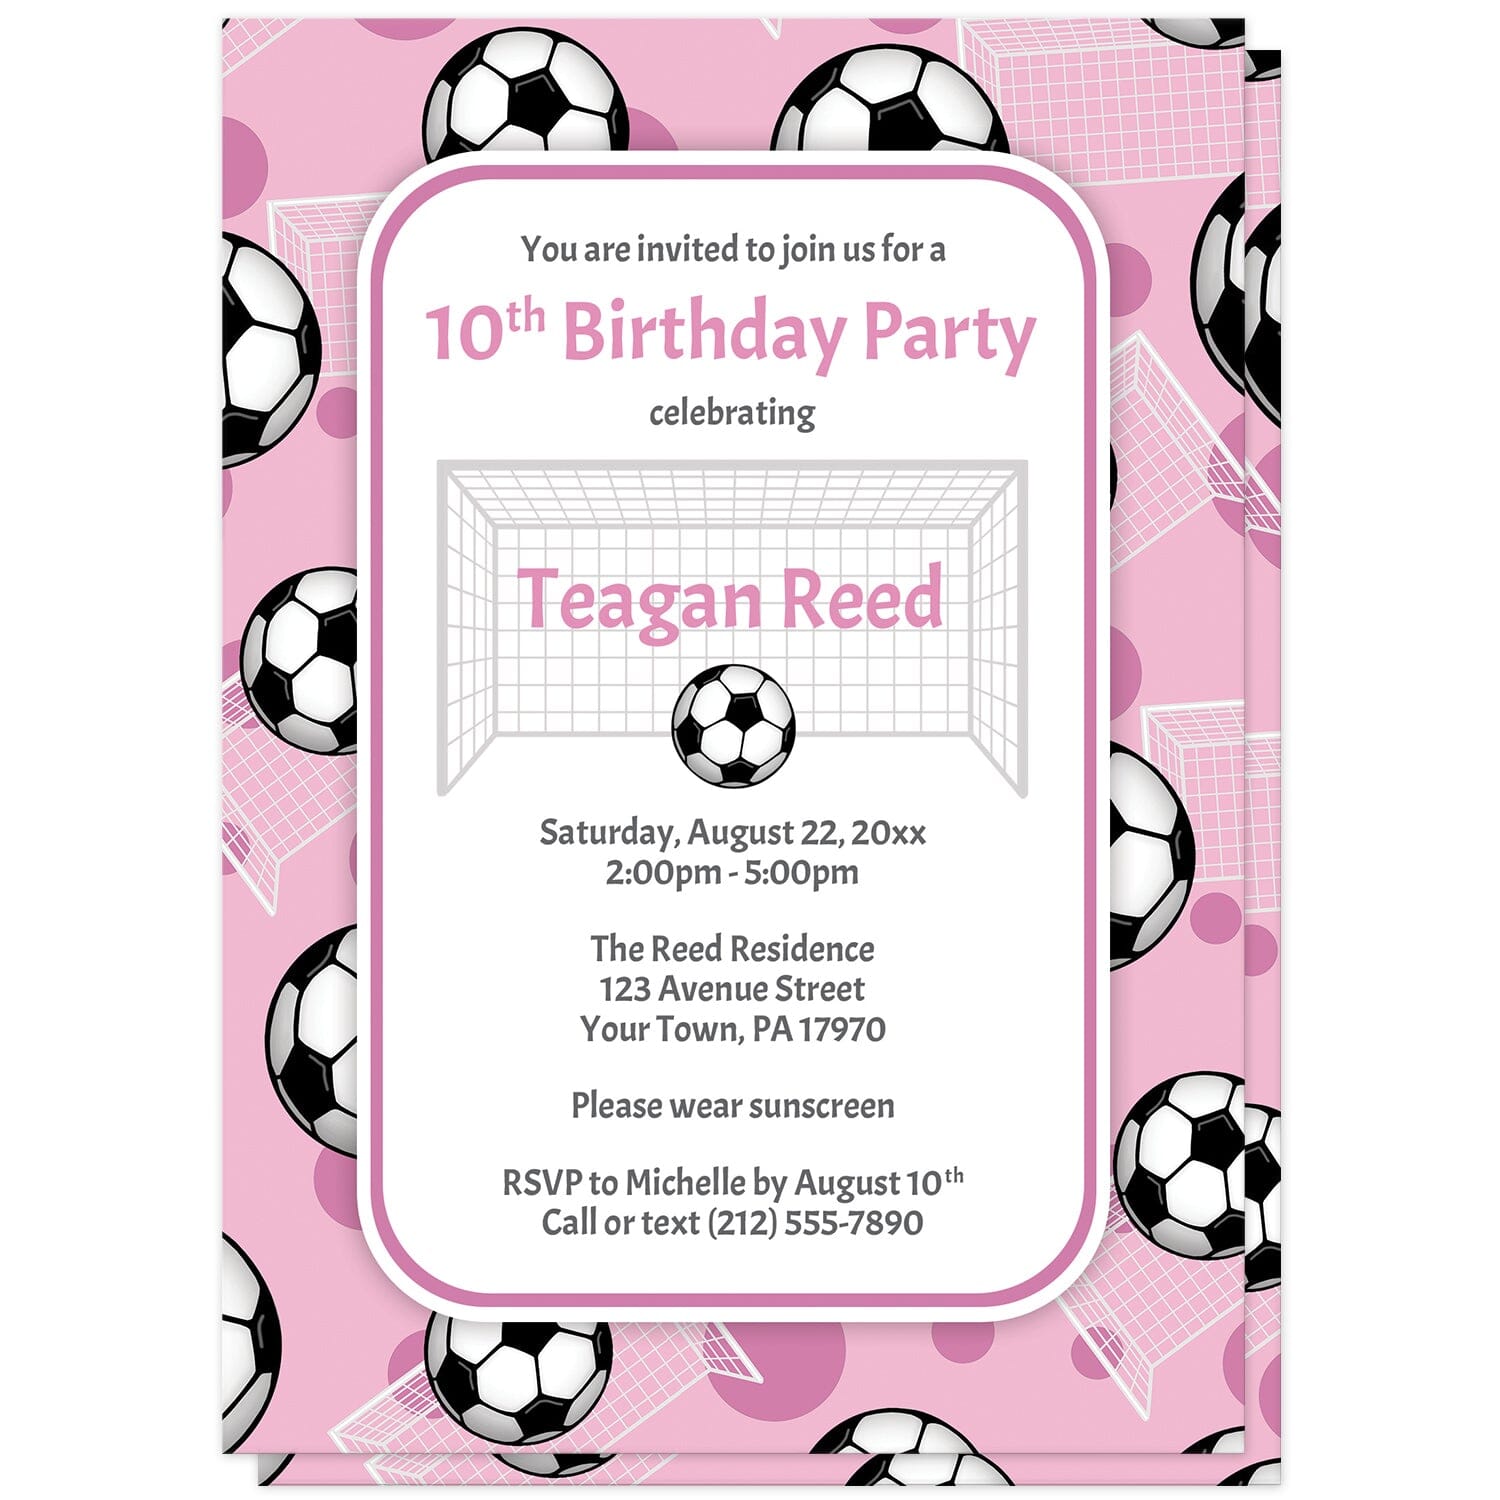 Soccer Ball and Goal Pink Birthday Party Invitations at Artistically Invited. Sports-themed soccer ball and goal pink birthday party invitations for any age or milestone that are uniquely illustrated with a pattern of soccer balls and soccer goals over a pink background color. Your personalized birthday party details are custom printed in pink and gray over white in the center over the soccer pattern.